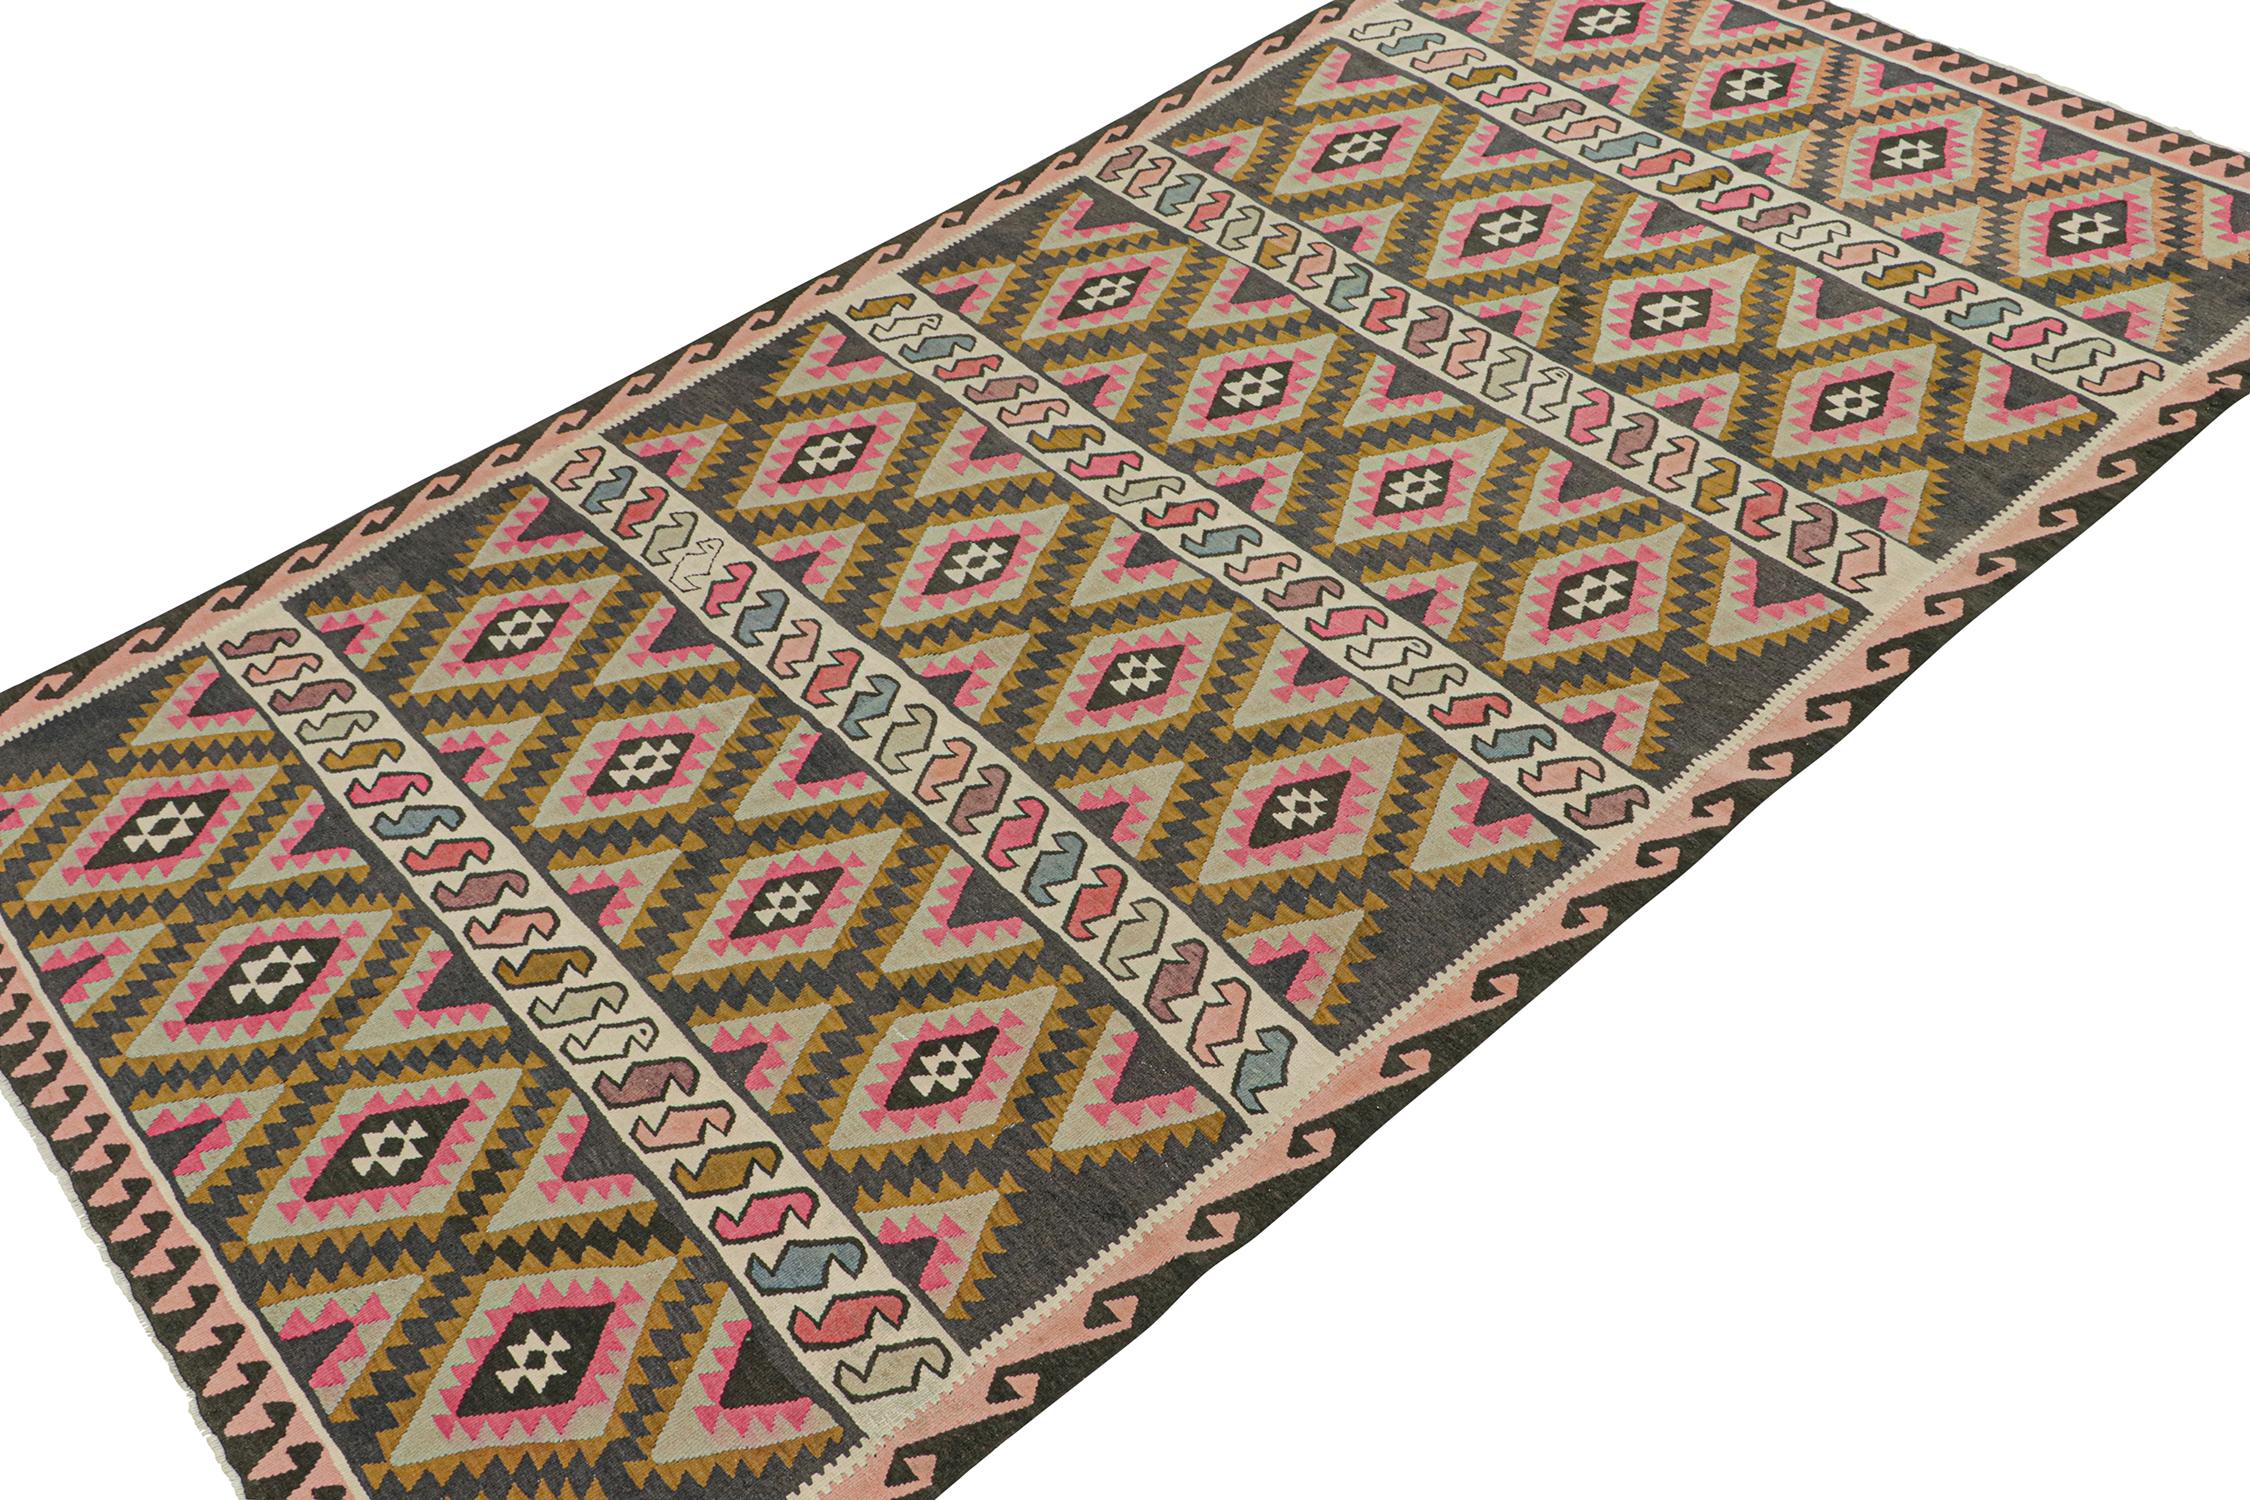 This vintage 6x11 Persian Kilim is a tribal rug from Meshkin—a small northwestern village known for its fabulous works. Handwoven in wool, it originates circa 1950-1960.

Further on the Design:

This tribal design prefers diamond patterns and motifs